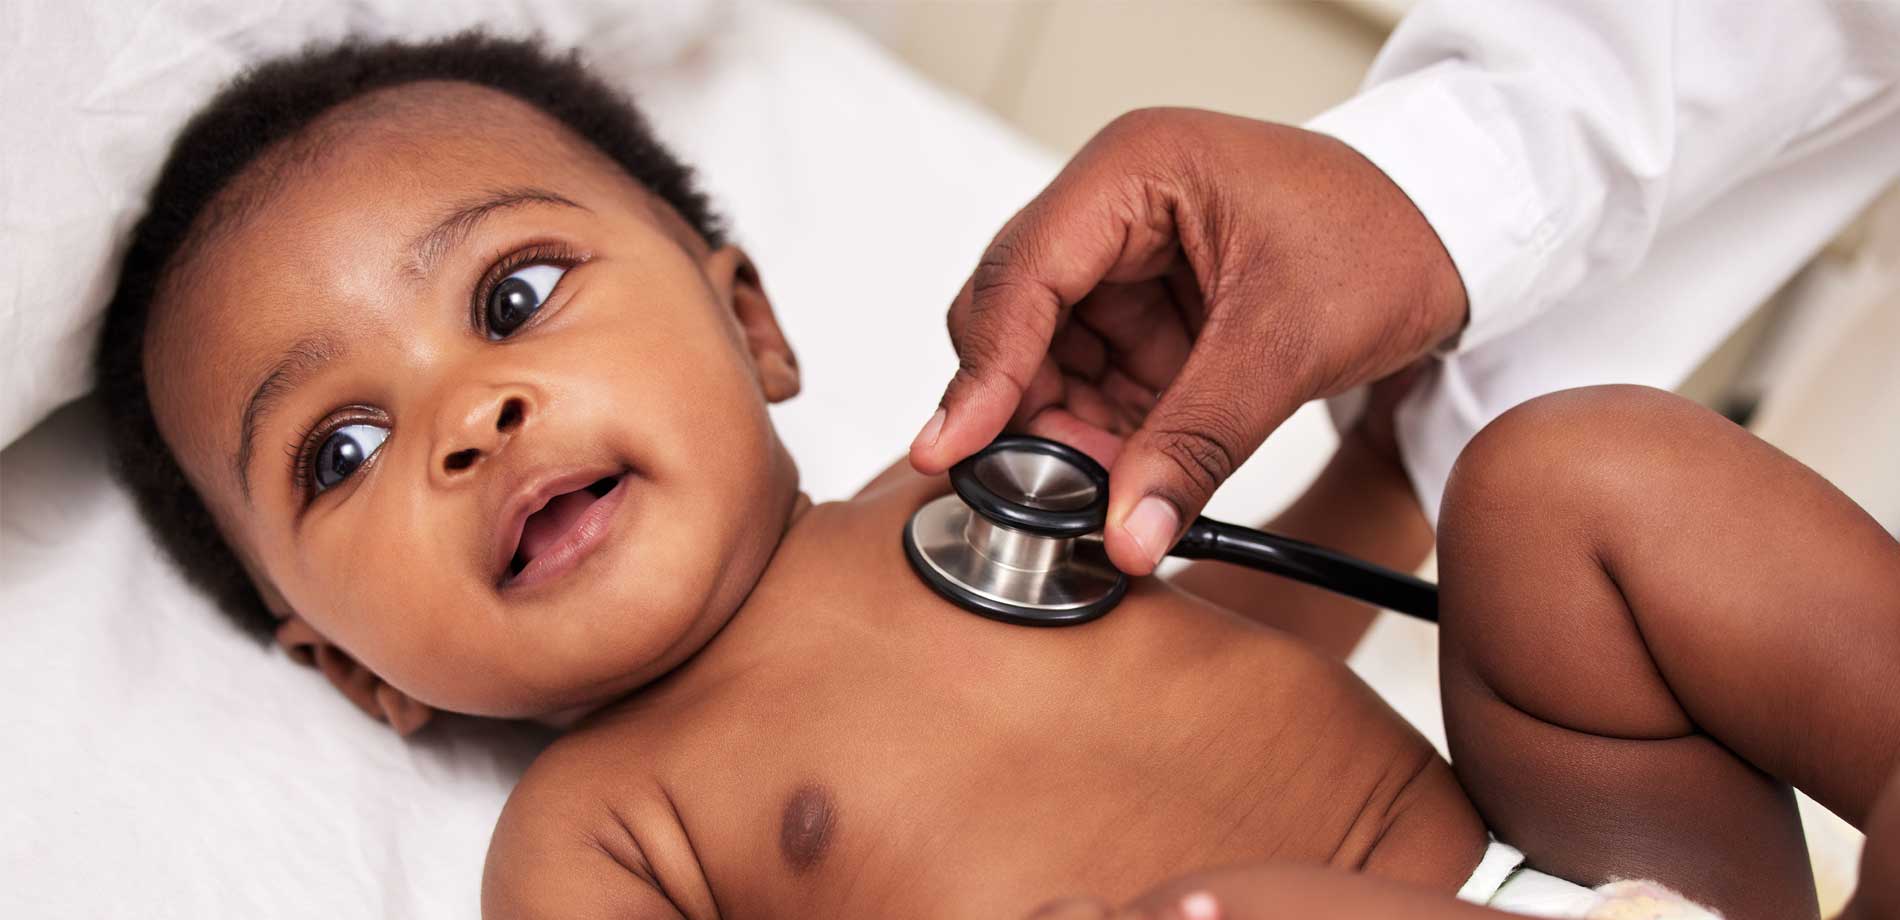 New Baby: Pediatrician Visits From 0-15 Months